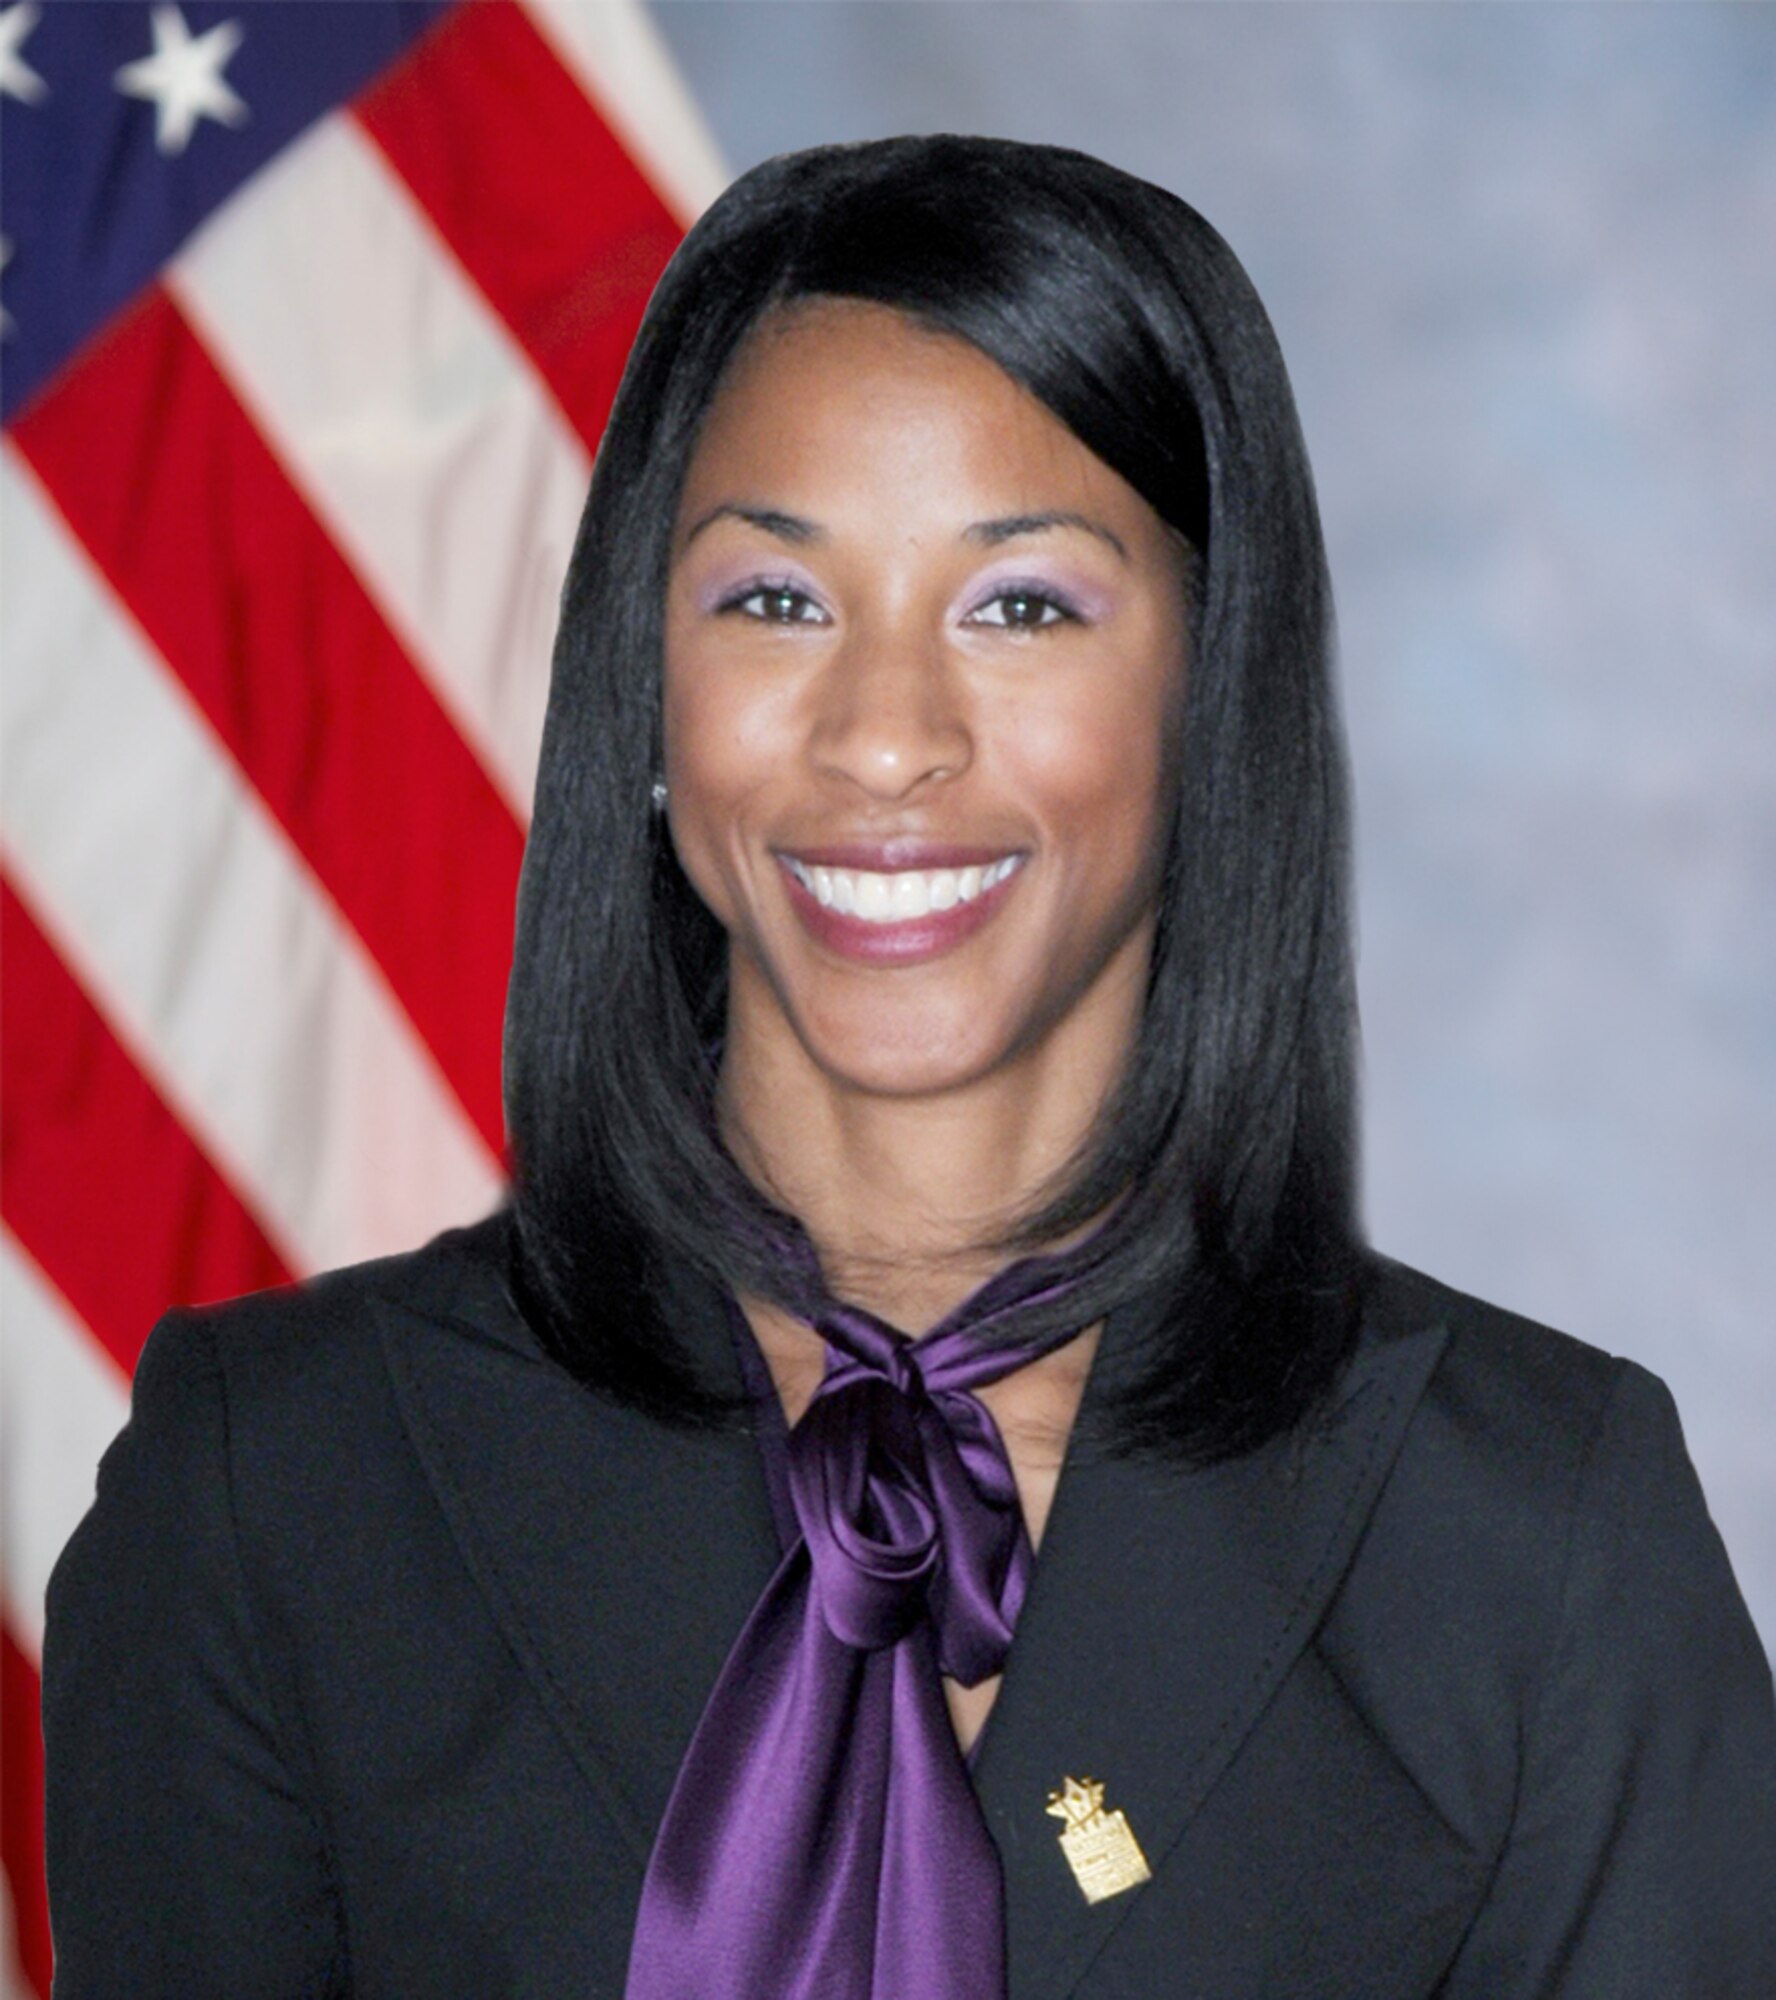 Dr. Shanee Pacley began her AFRL career as a co-op student while she attended college.  (AFRL Image)